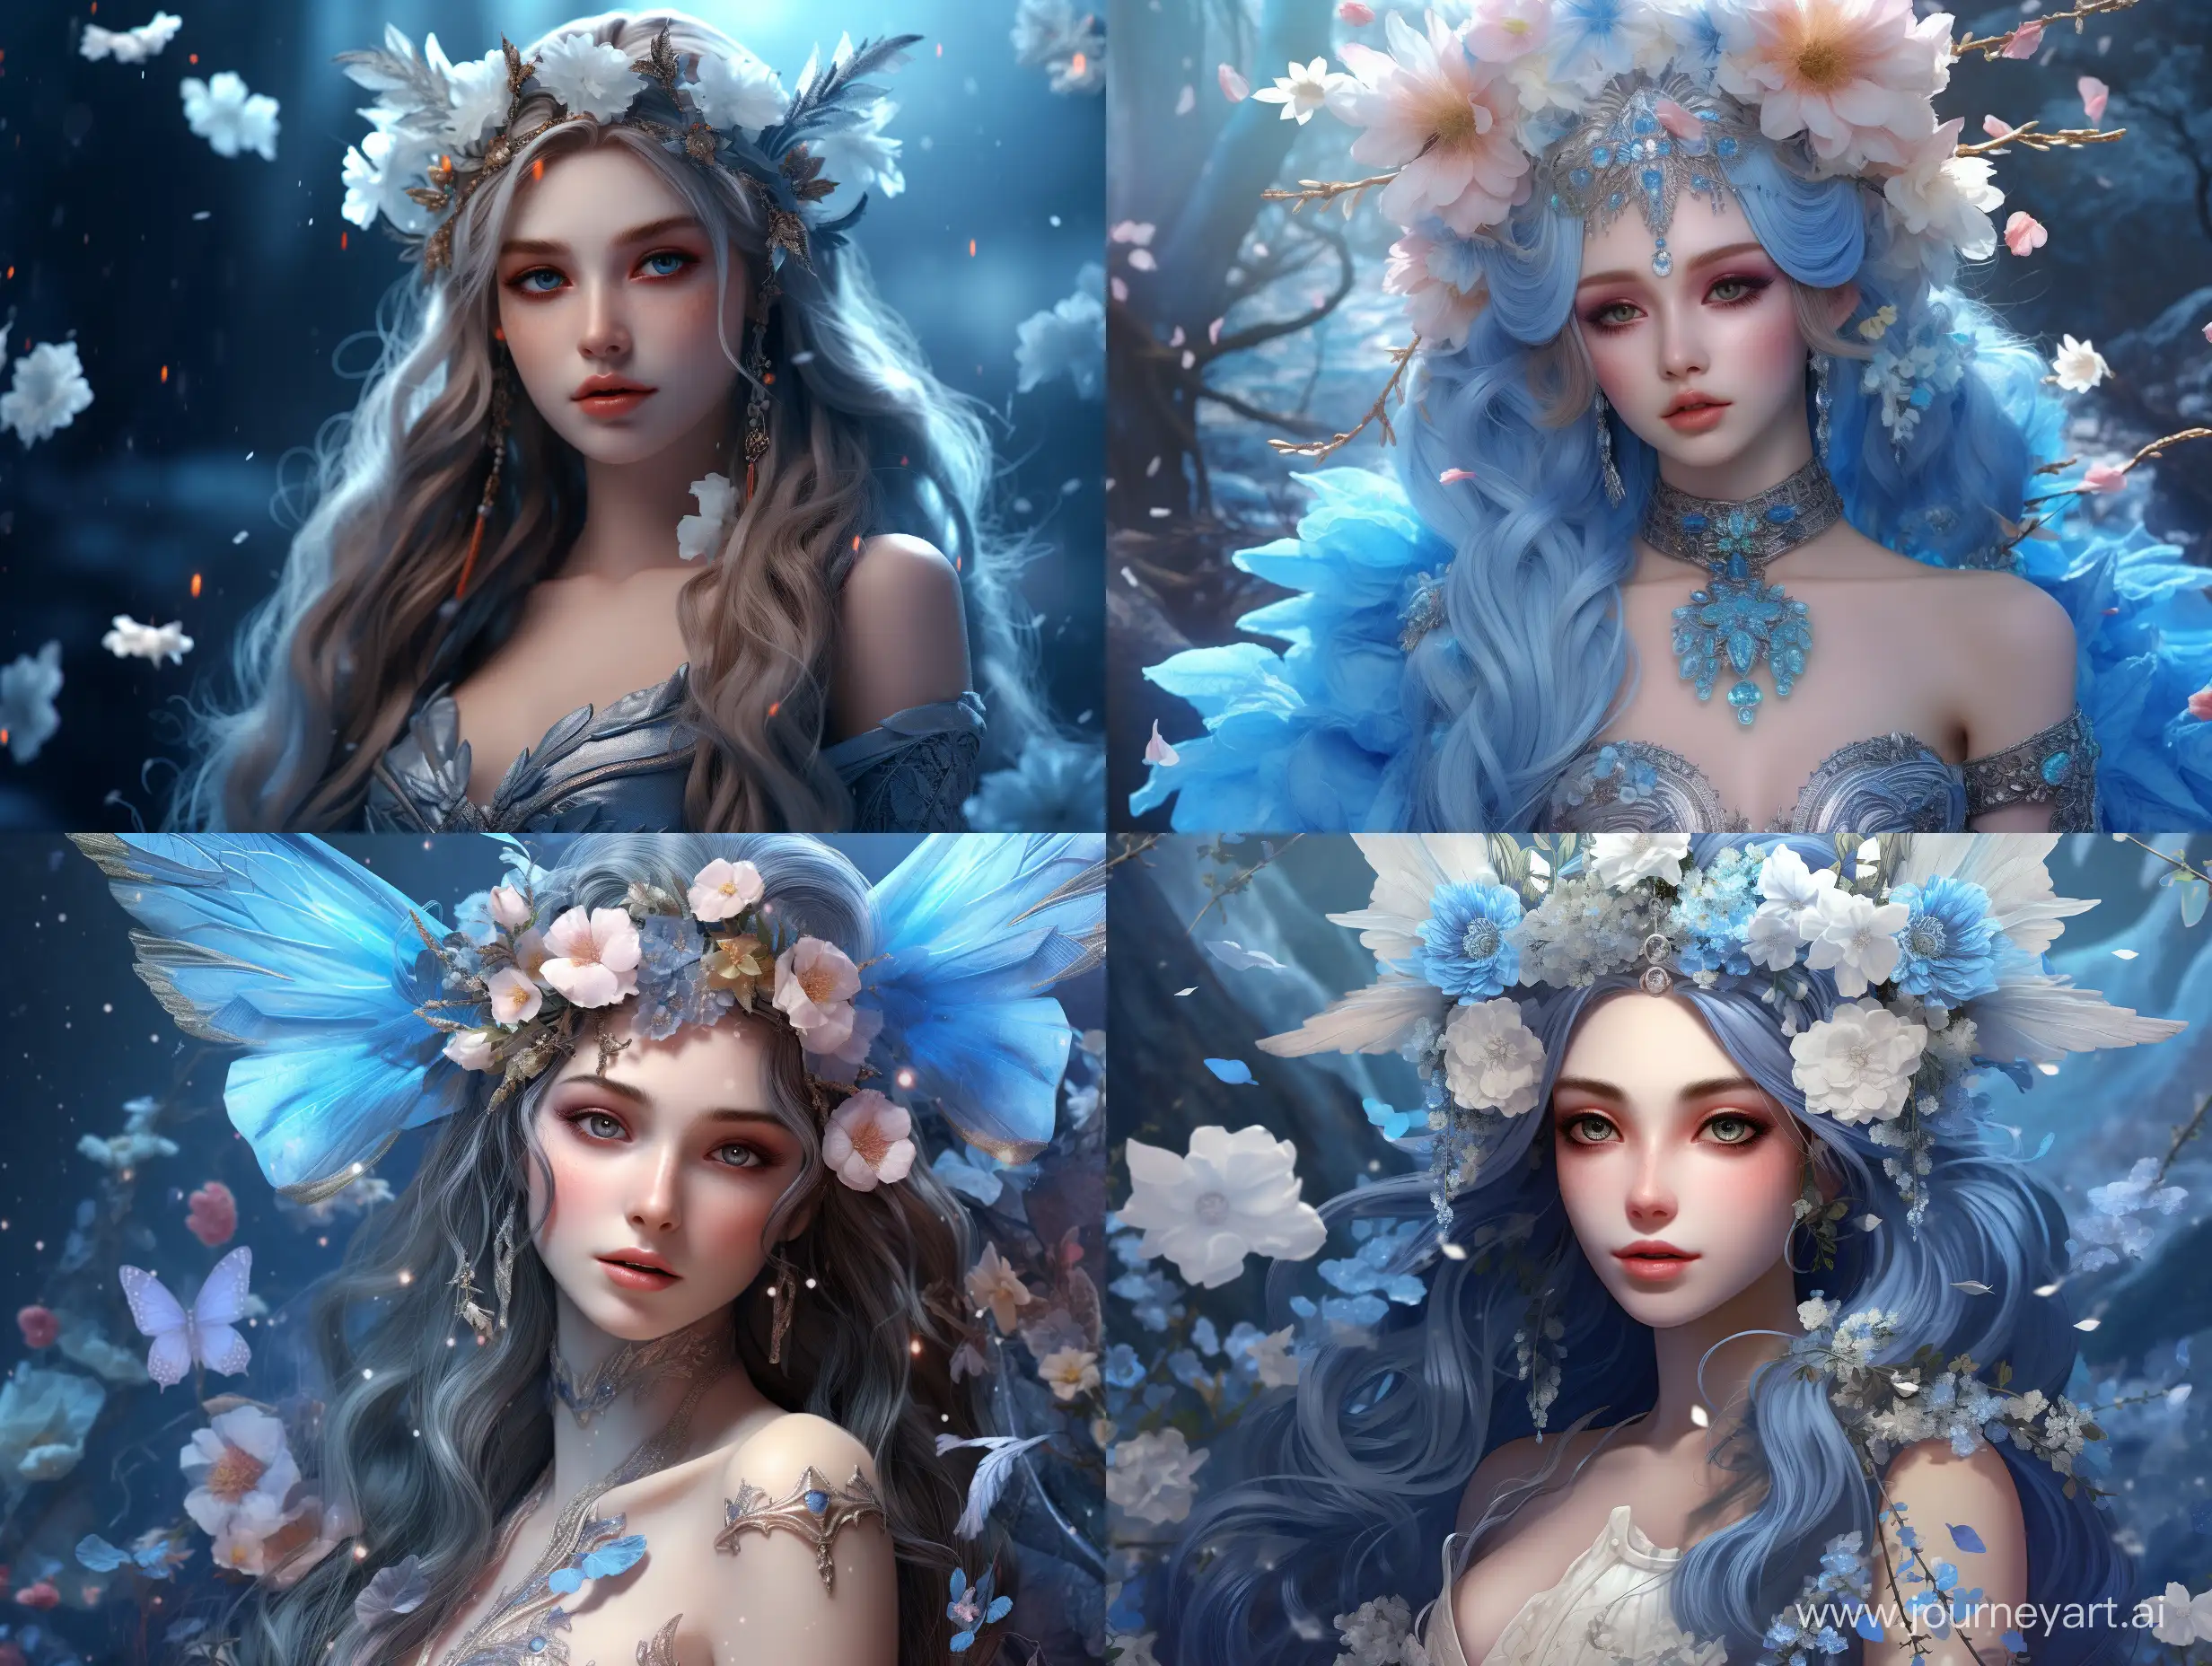 Enchanting-Blue-Elf-with-Intricate-Floral-Crown-Stunning-8K-Fantasy-Art